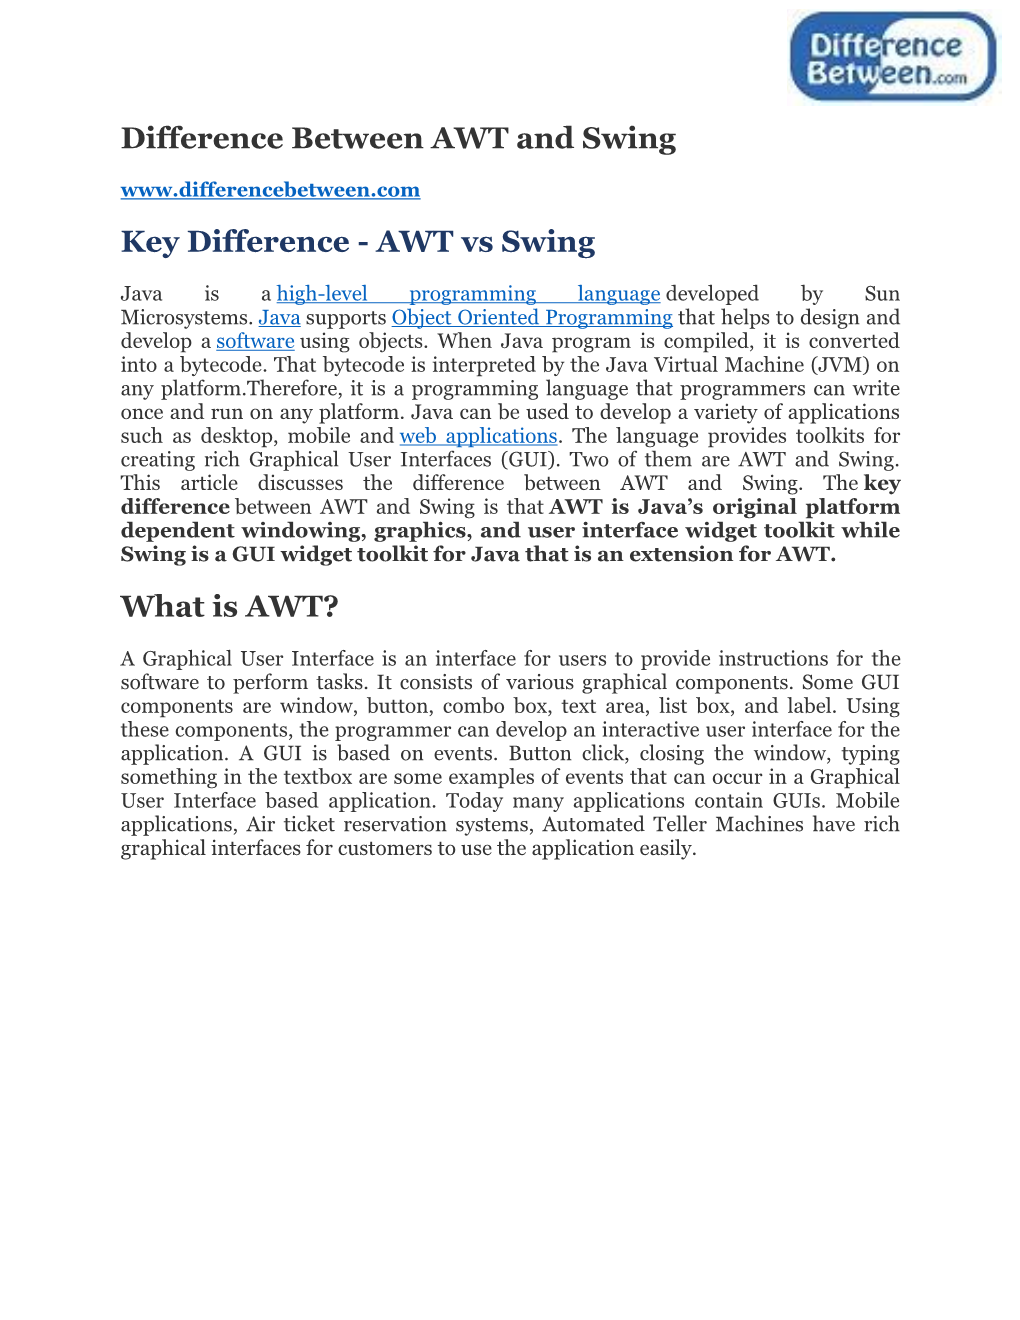 Difference Between AWT and Swing Key Difference